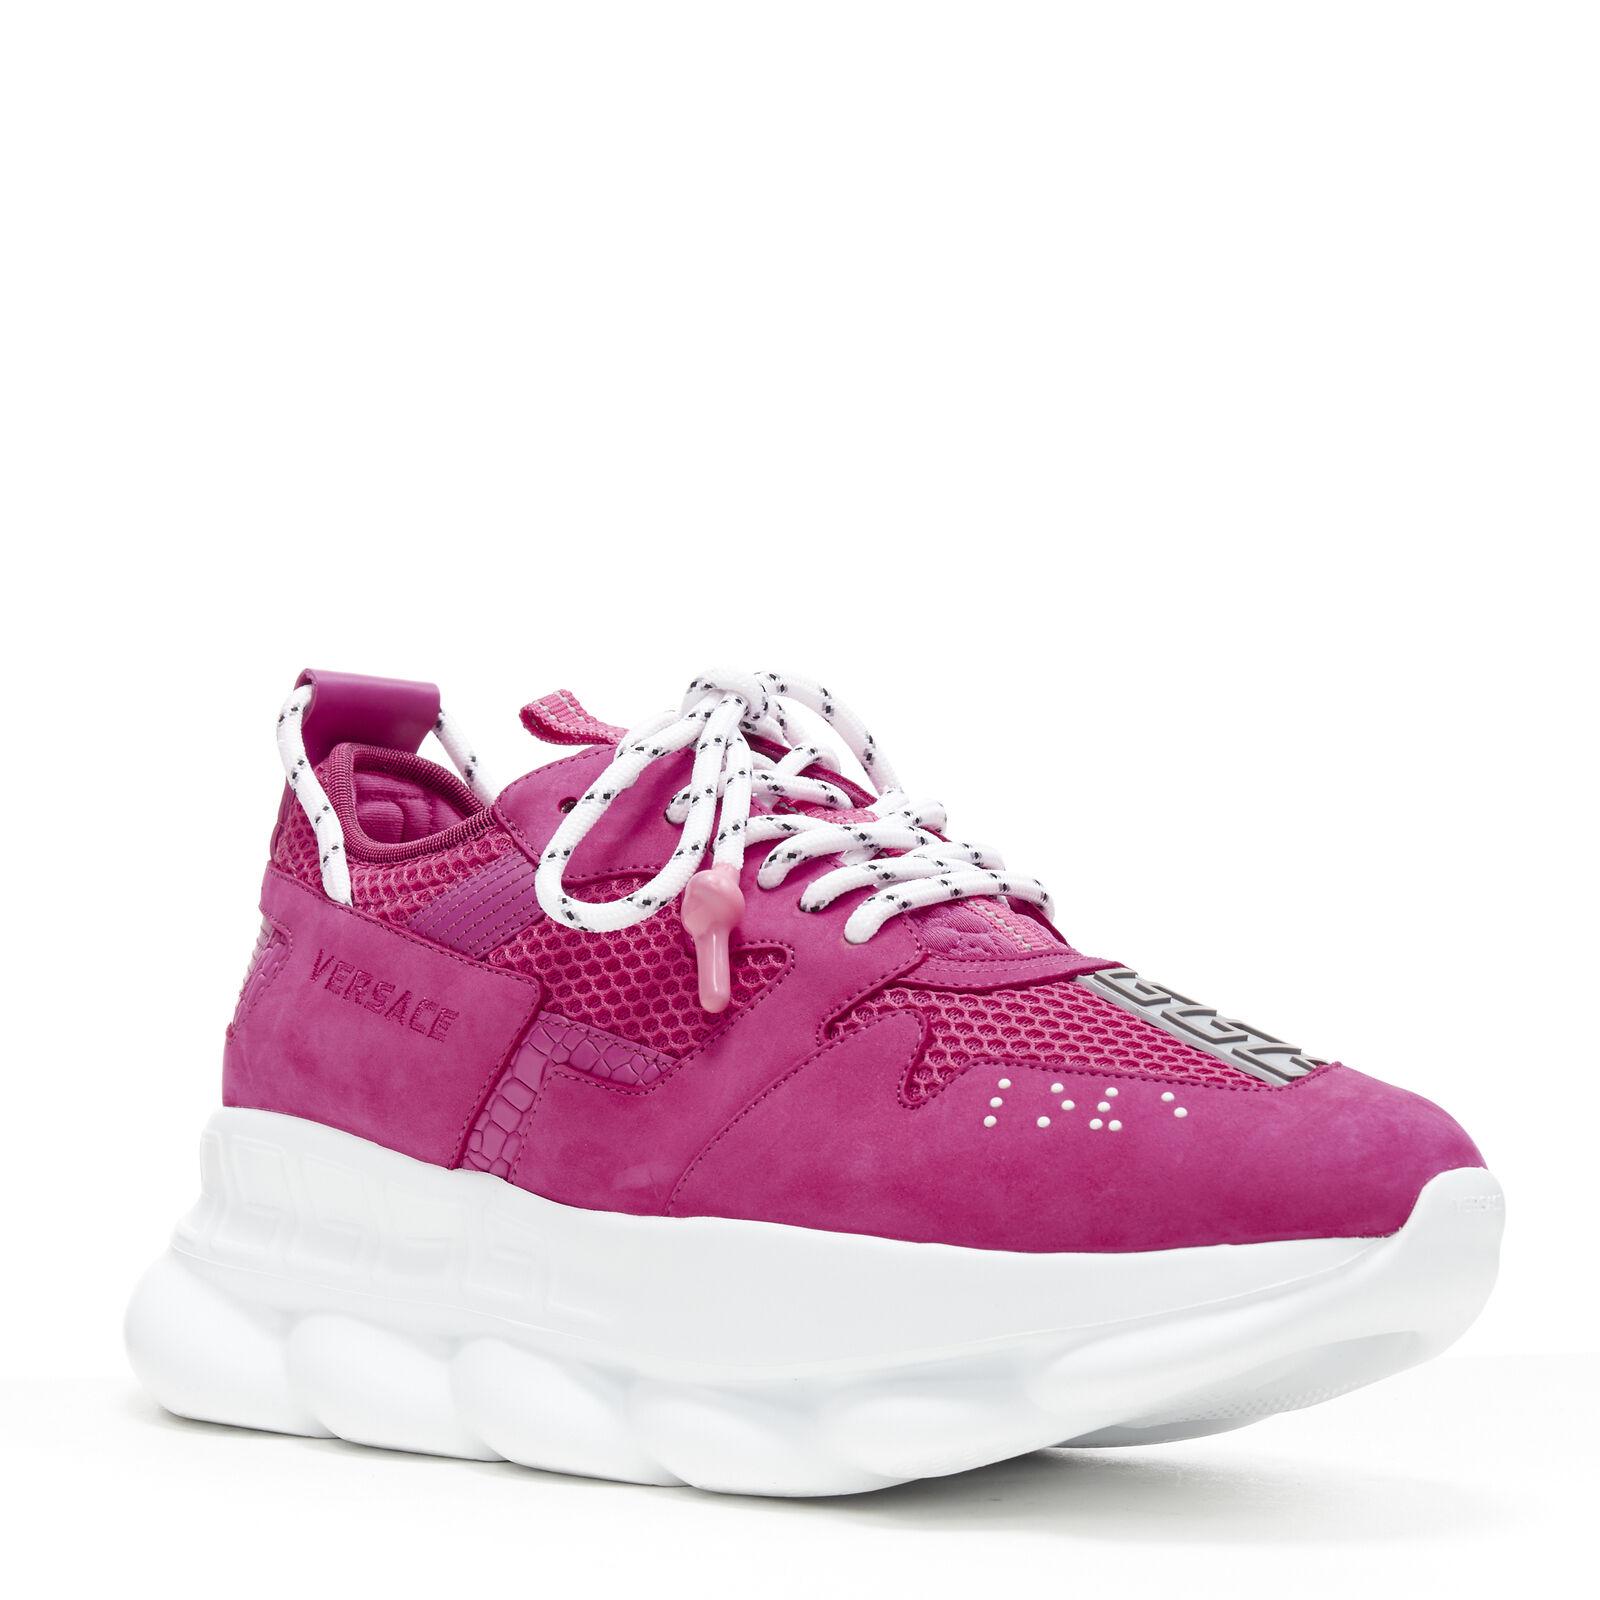 new VERSACE Chain Reaction Blowzy all pink suede low top chunky sneaker EU42.5
Reference: TGAS/B01206
Brand: Versace
Designer: Donatella Versace
Model: Versace Chain Reaction
Material: Fabric, Leather
Color: Pink
Pattern: Solid
Closure: Lace